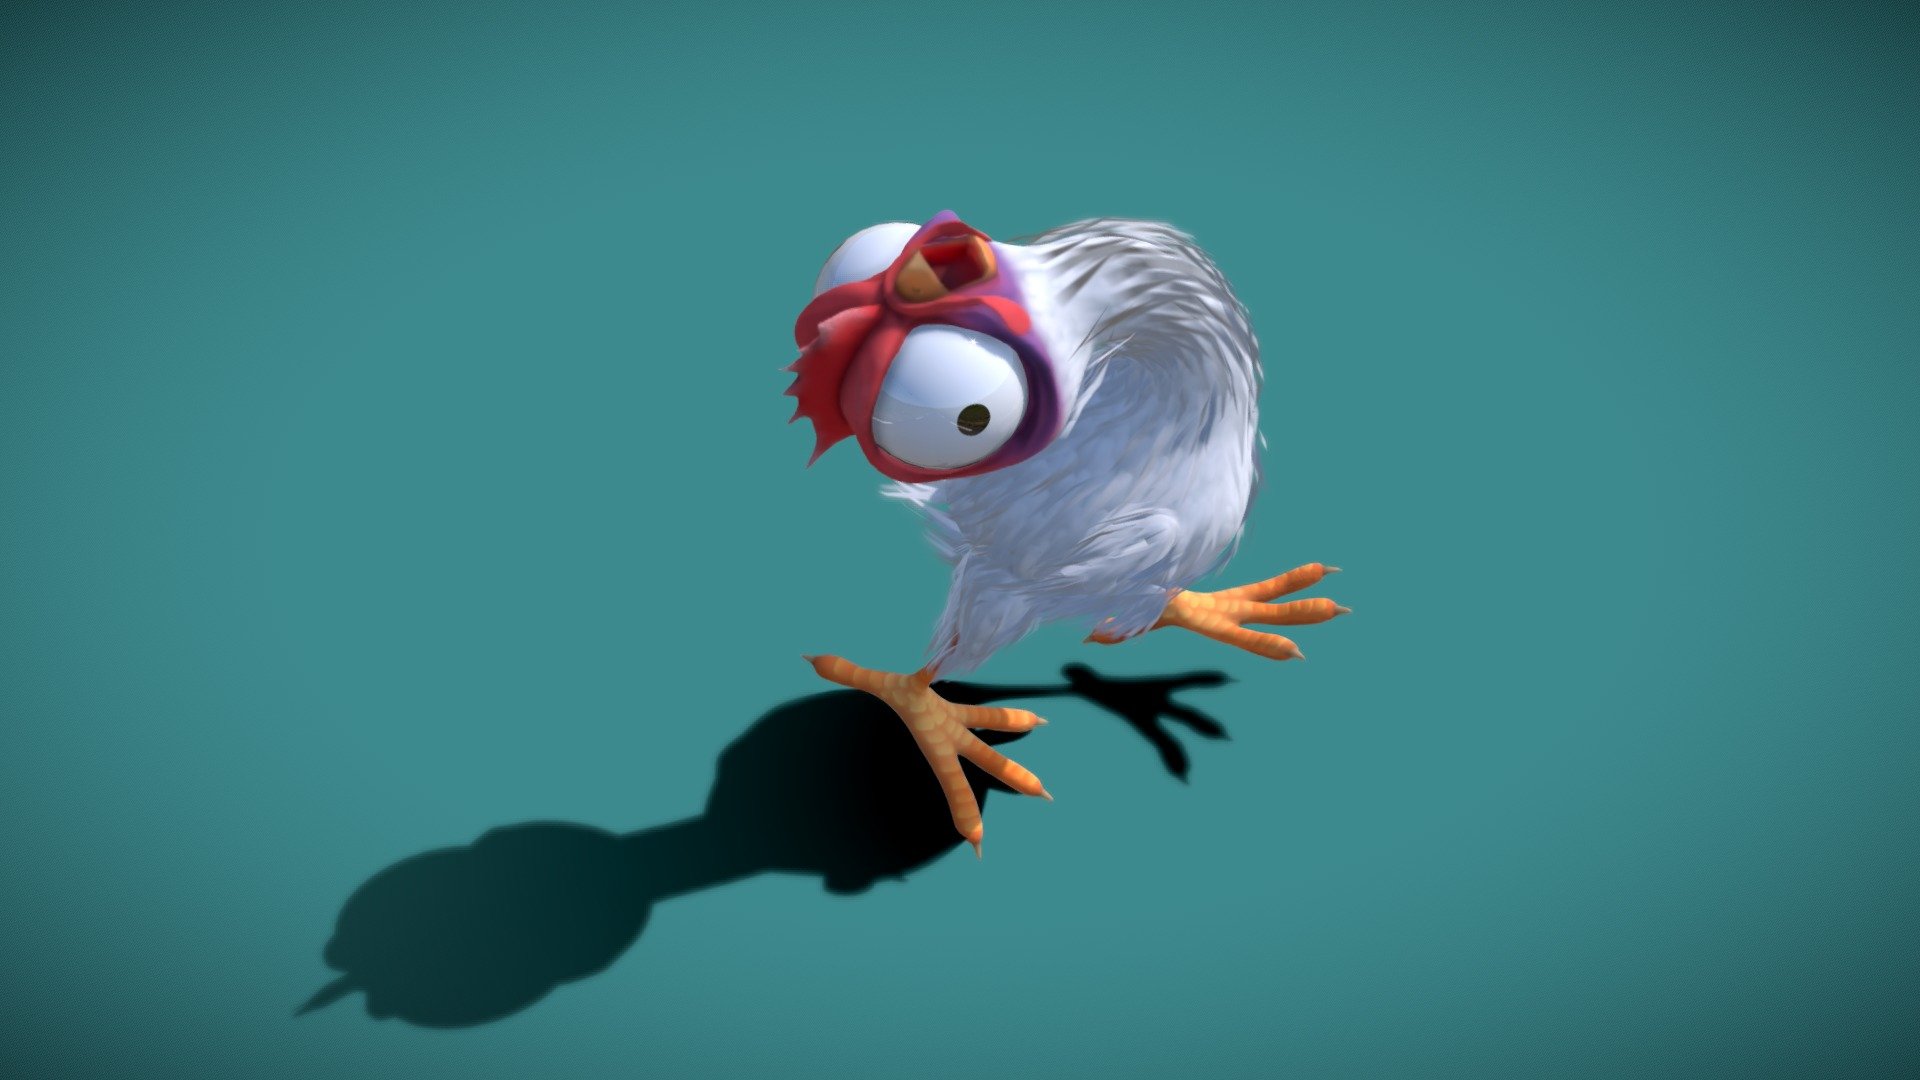 First attempt at designing and modeling a character, had a great time sculpting, retopologizing, rigging and animating in #blender

Check out the renders on my Artstation post: https://www.artstation.com/artwork/ybVJzK

Feedback is greatly appreciated!

 - Stylized Chicken Character - 3D model by Troublesome. (@spospider) 3d model